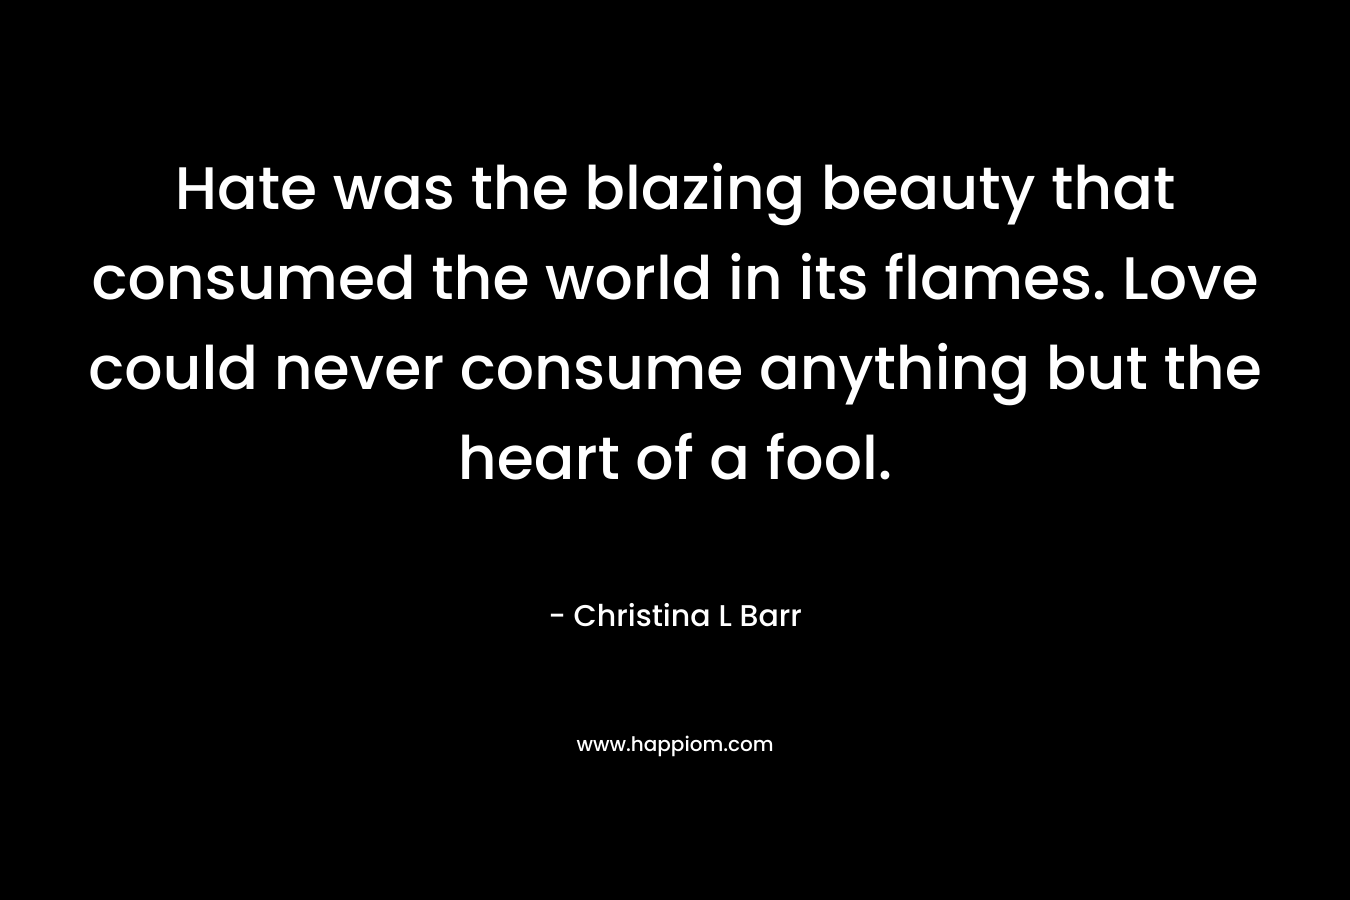 Hate was the blazing beauty that consumed the world in its flames. Love could never consume anything but the heart of a fool.